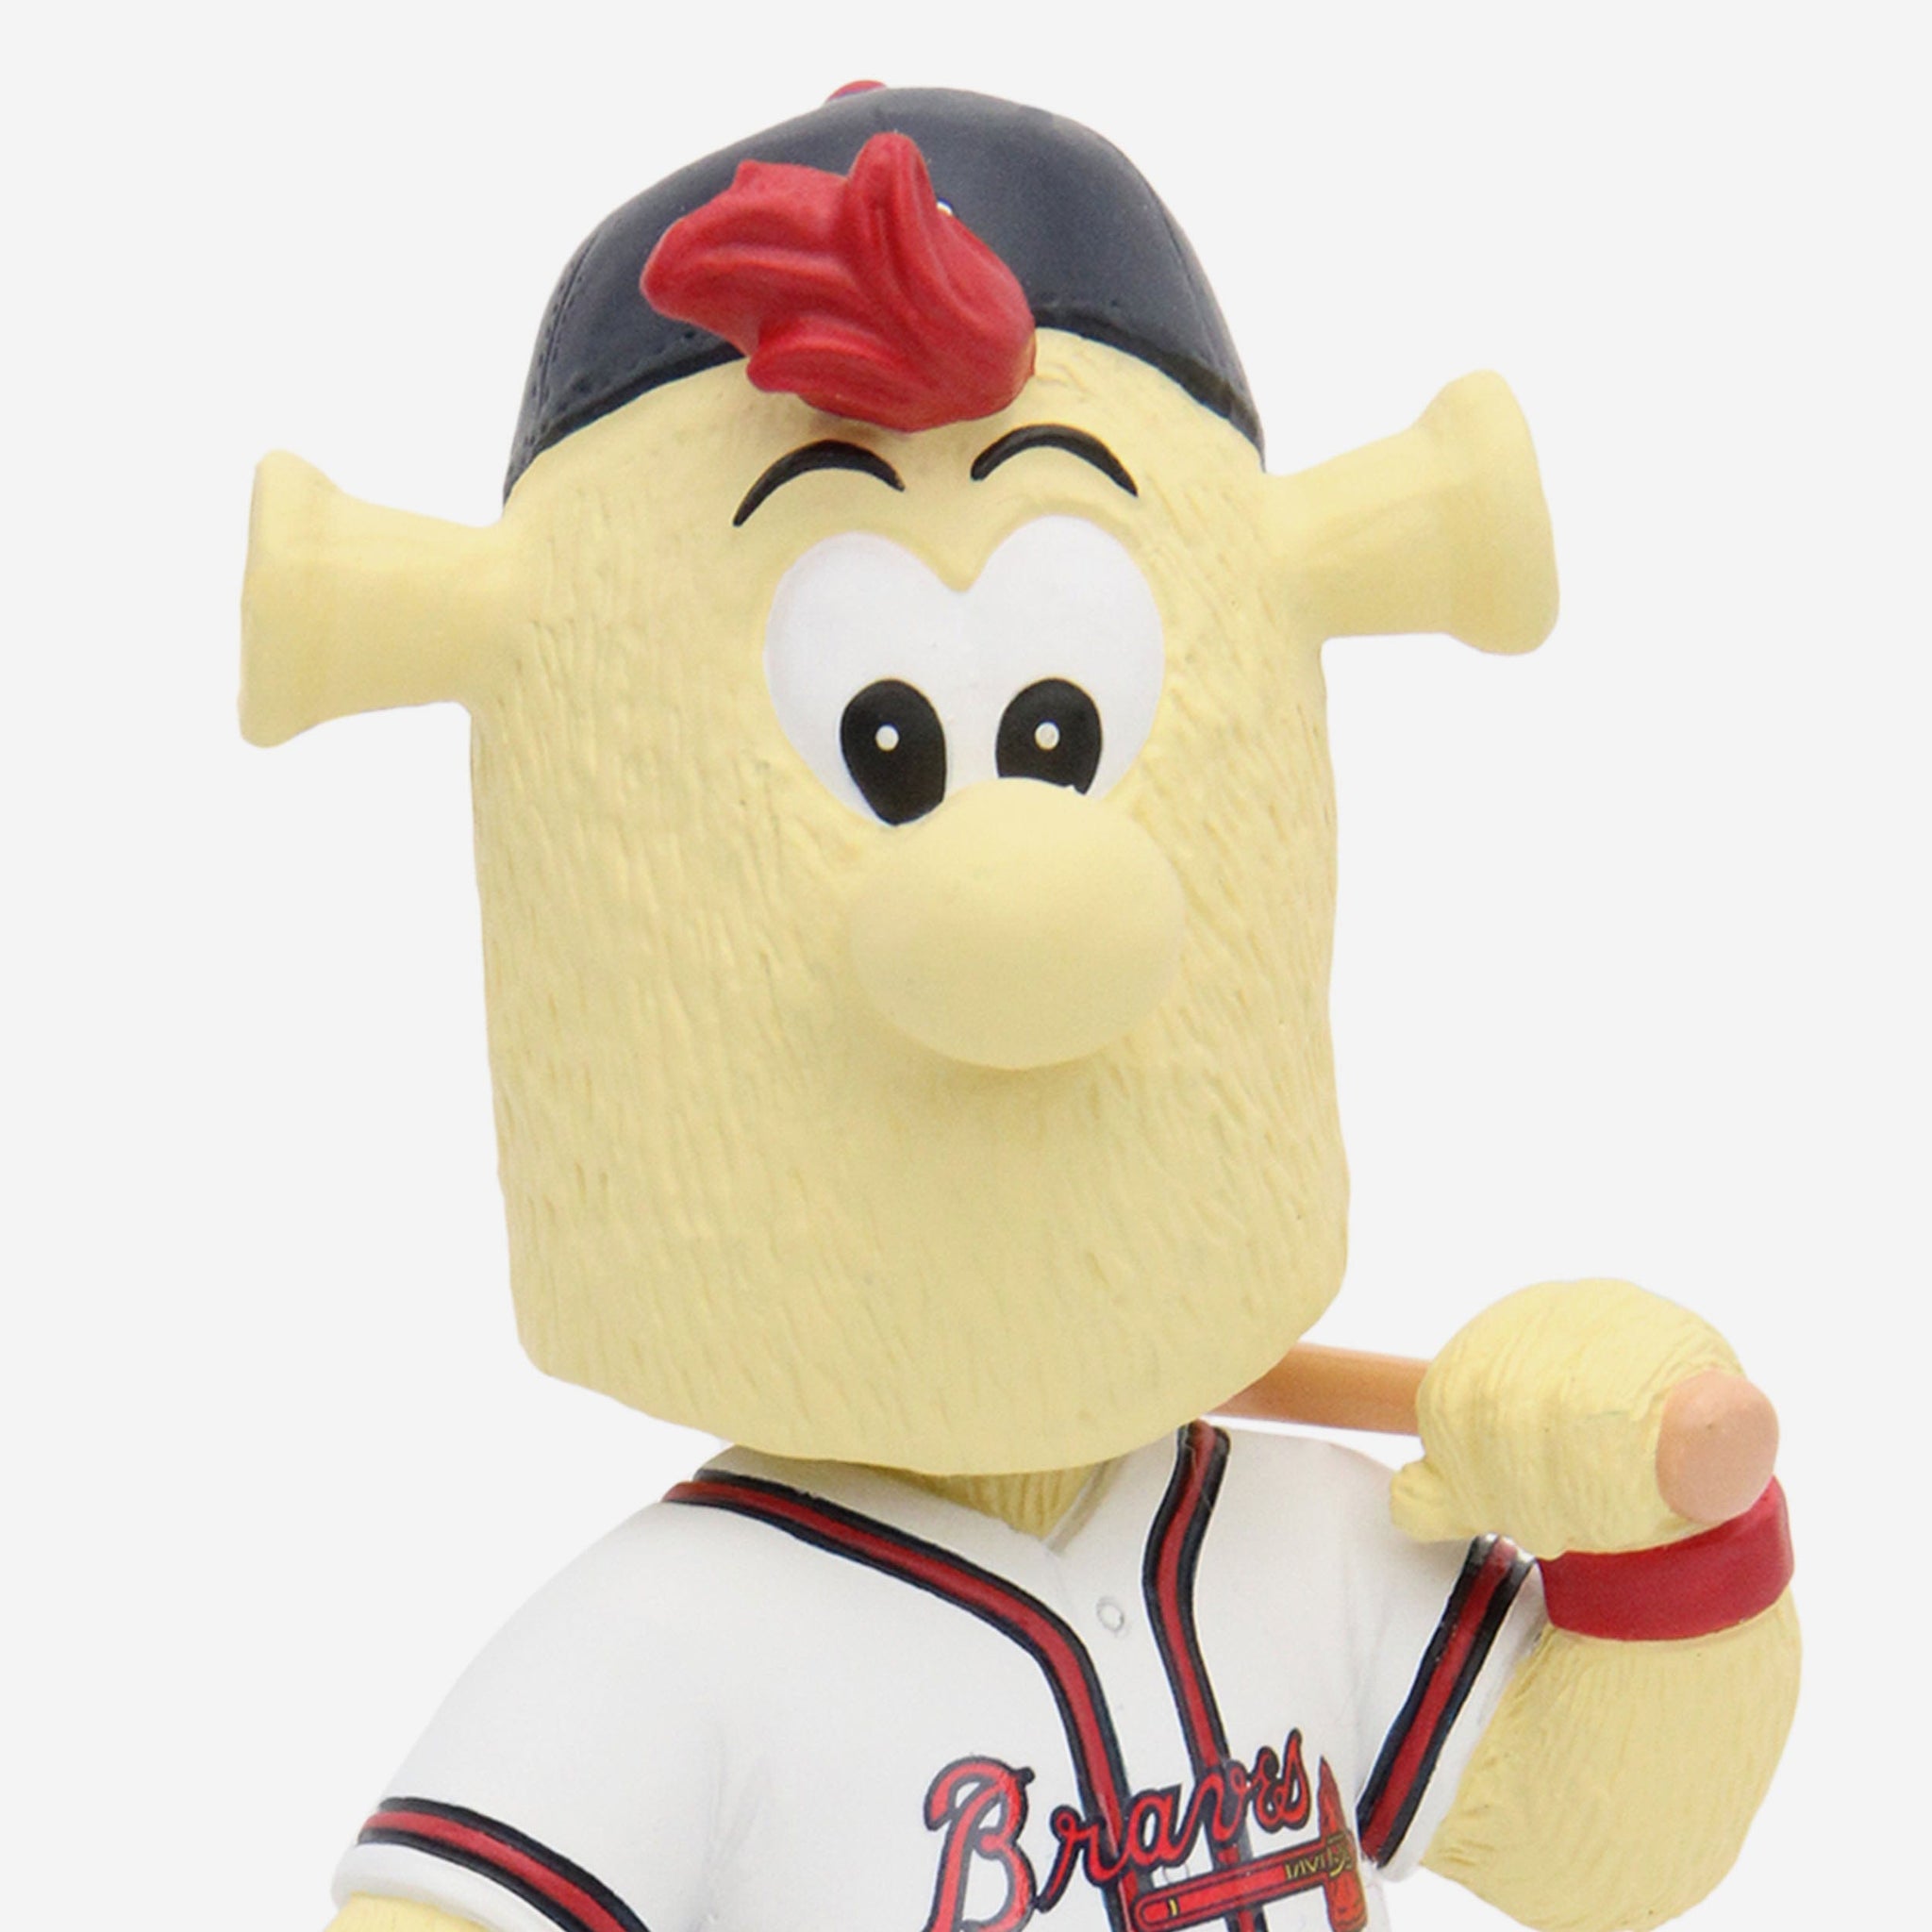 FOCO Releases a Blooper in Braves Overalls Bobblehead! - Sports